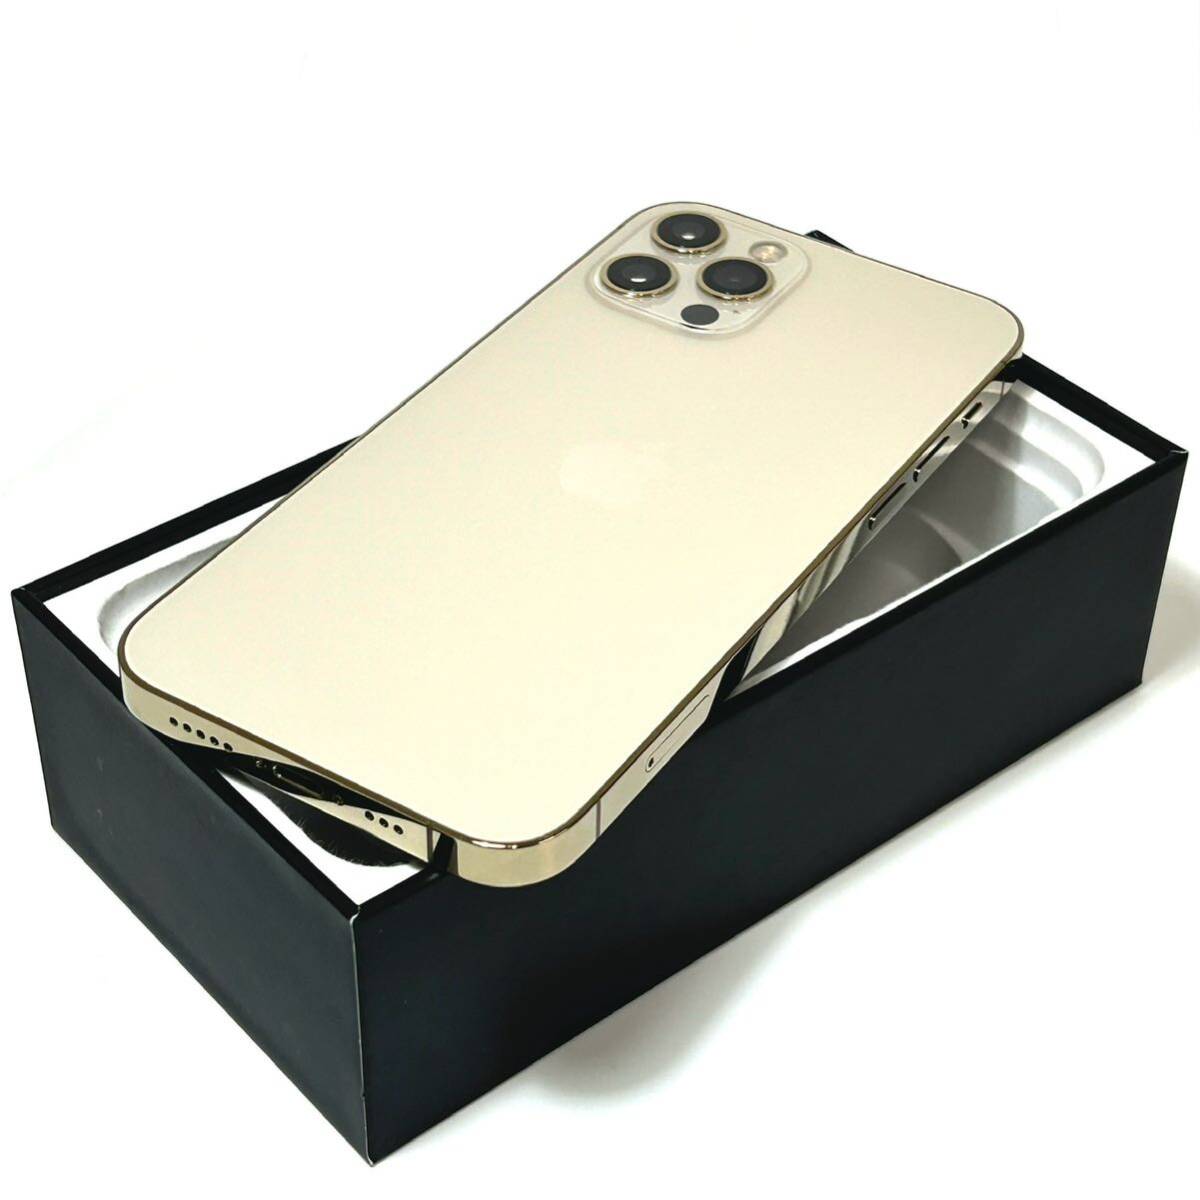 [ beautiful goods ]AppleliPhone 12 Pro 128GBlSIM free l maximum battery capacity 86%l Gold l operation verification settled l special delivery shipping possible 